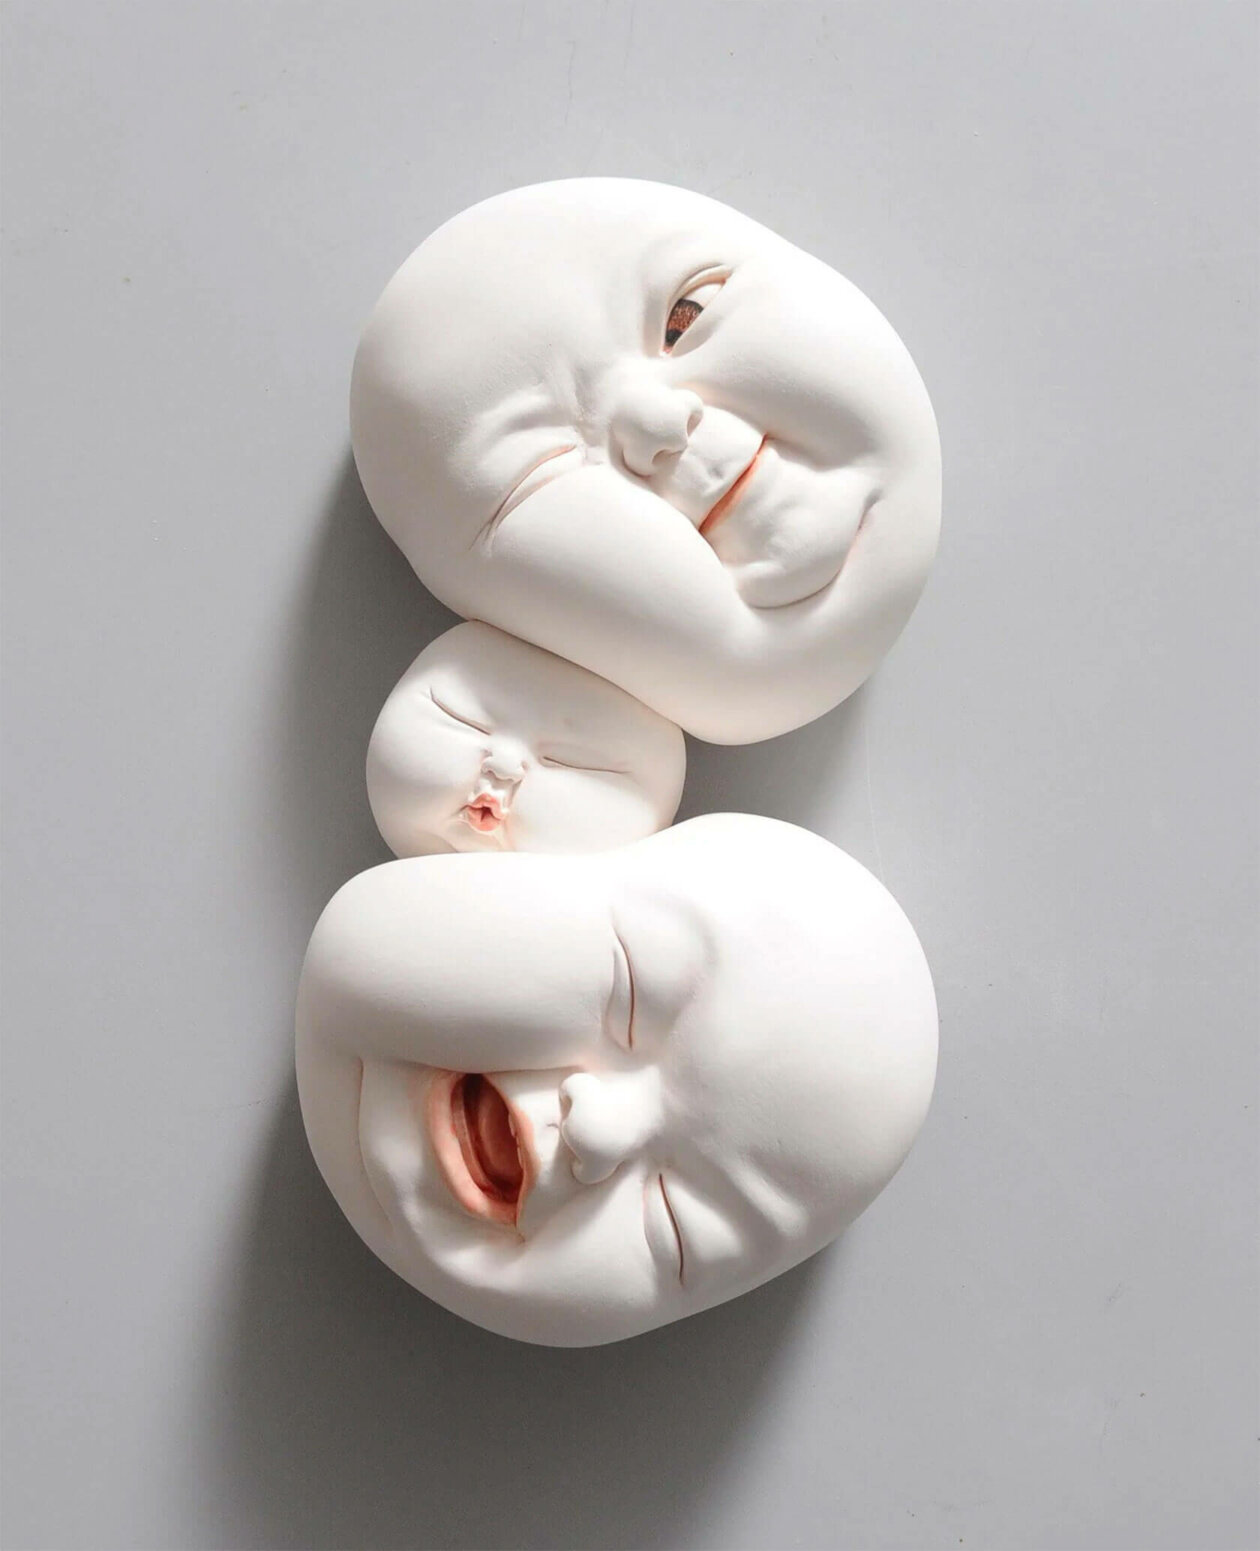 Distorted Baby Faces, Surreal Ceramic Sculptures By Johnson Tsang (15)